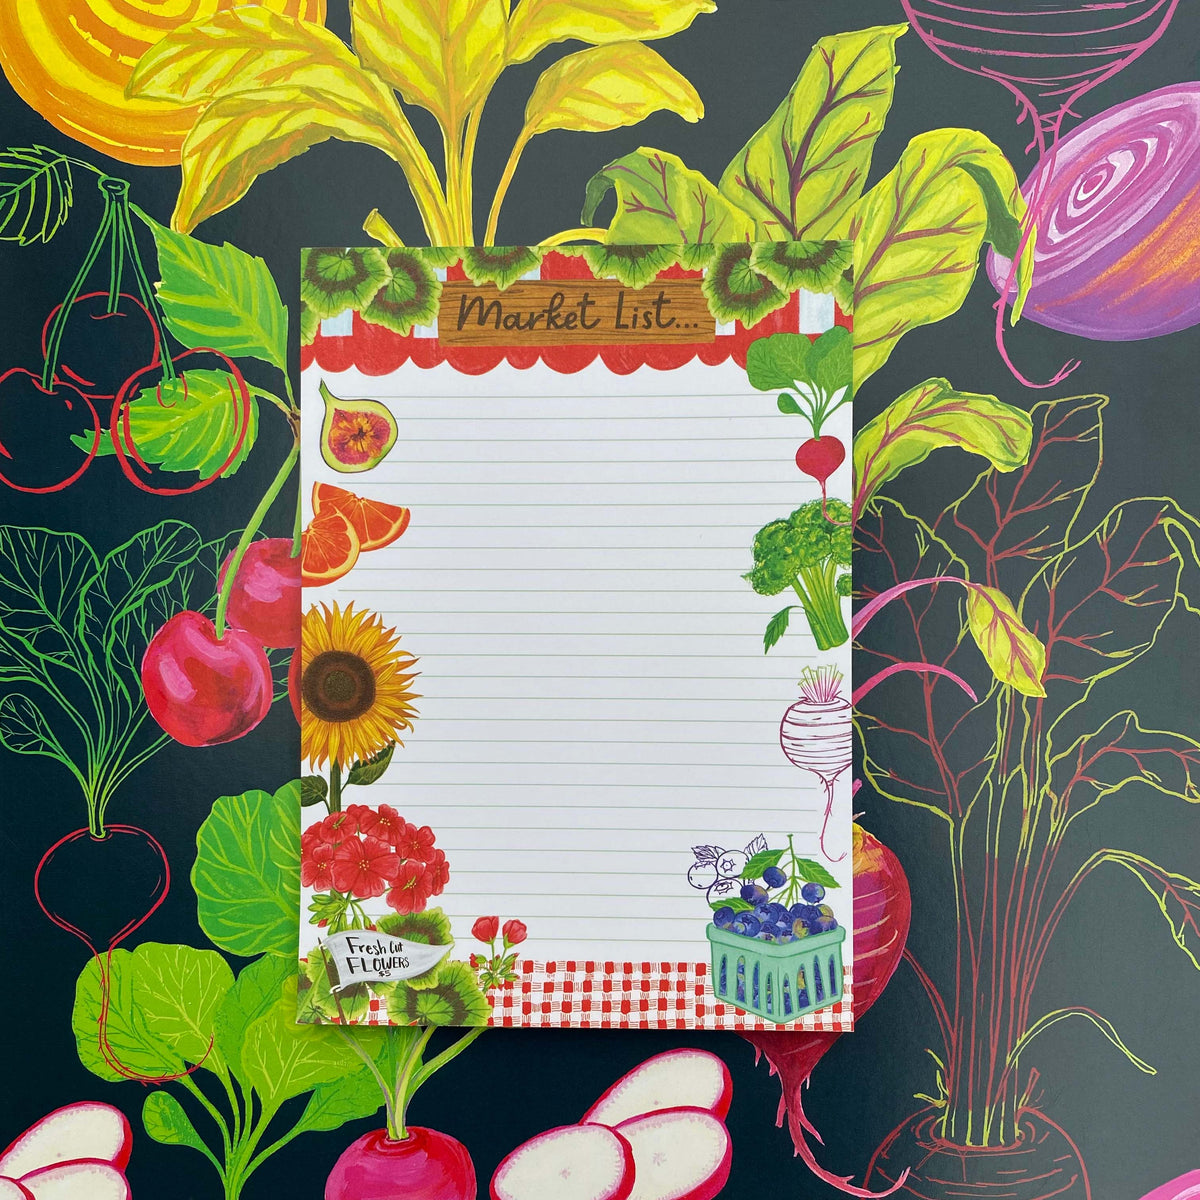 black background with colorful fruits and vegetables. A Market List Notepad sits on top of this illustration containing illustrations of fruits, vegetables and flowers. 